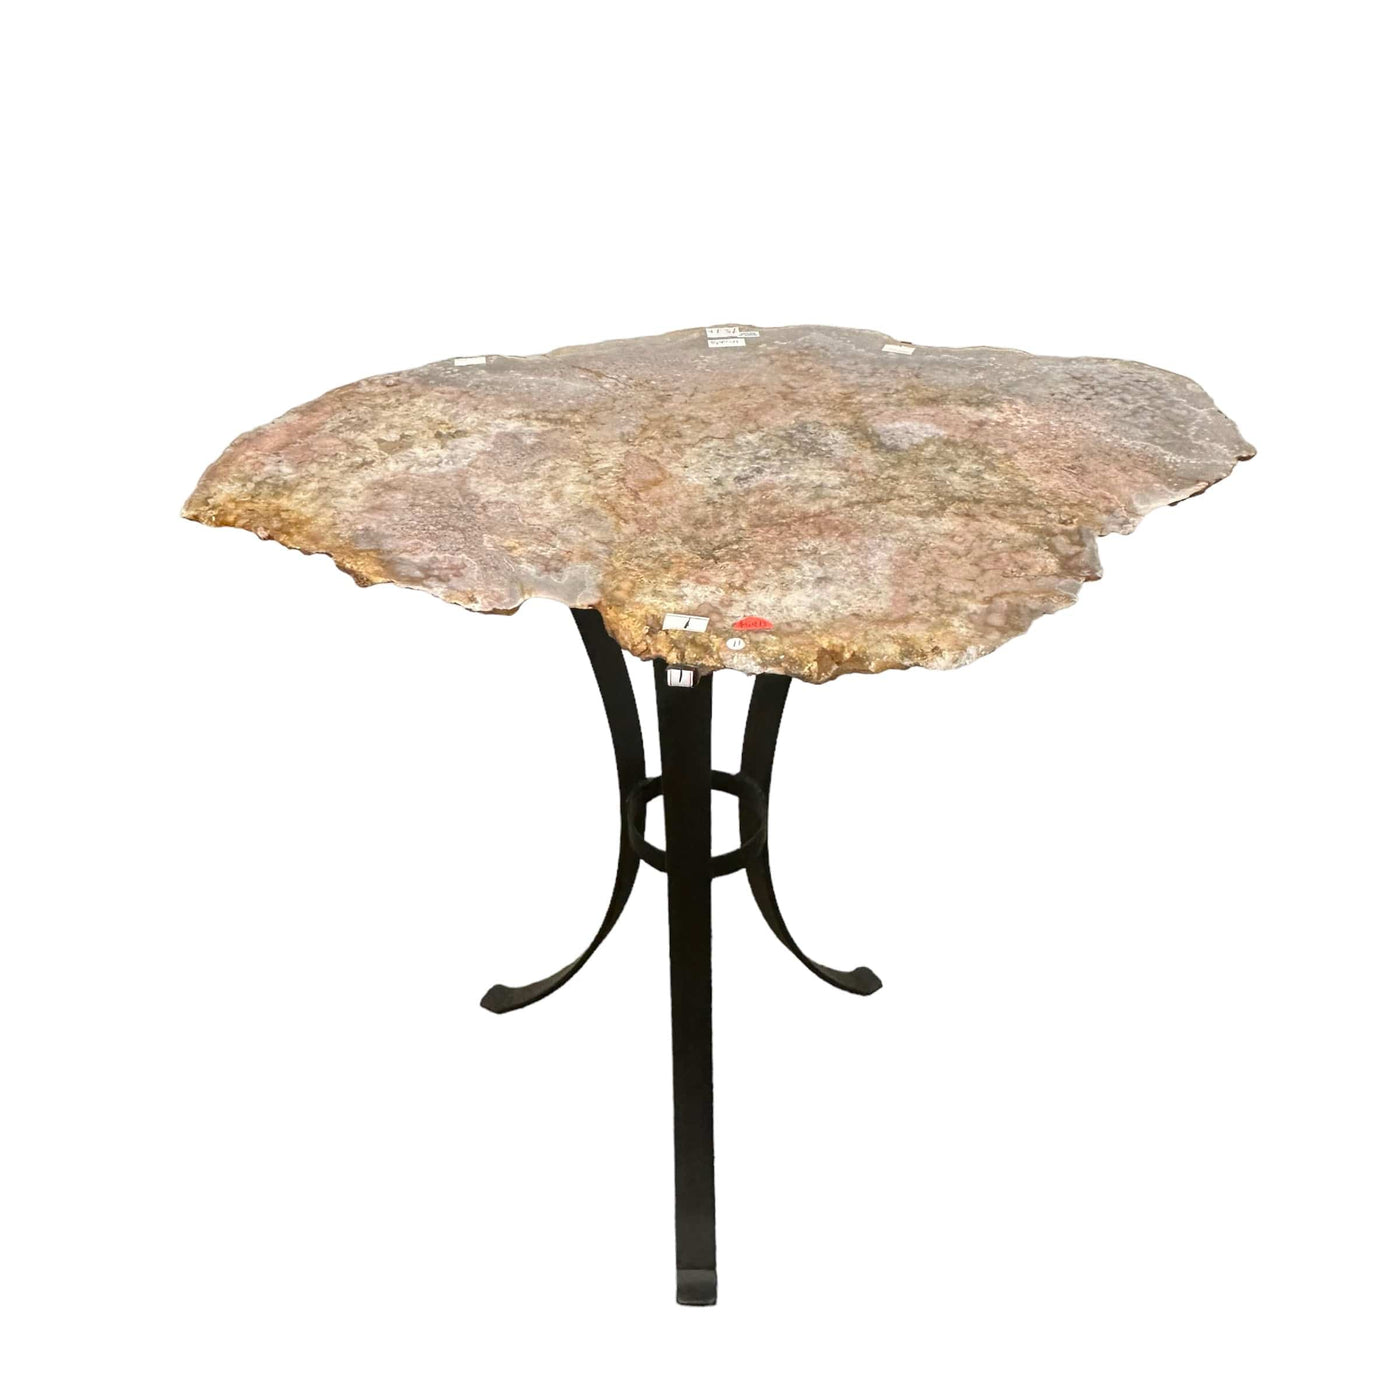 table is made out of a slab of pink amethyst that has been polished smooth on top